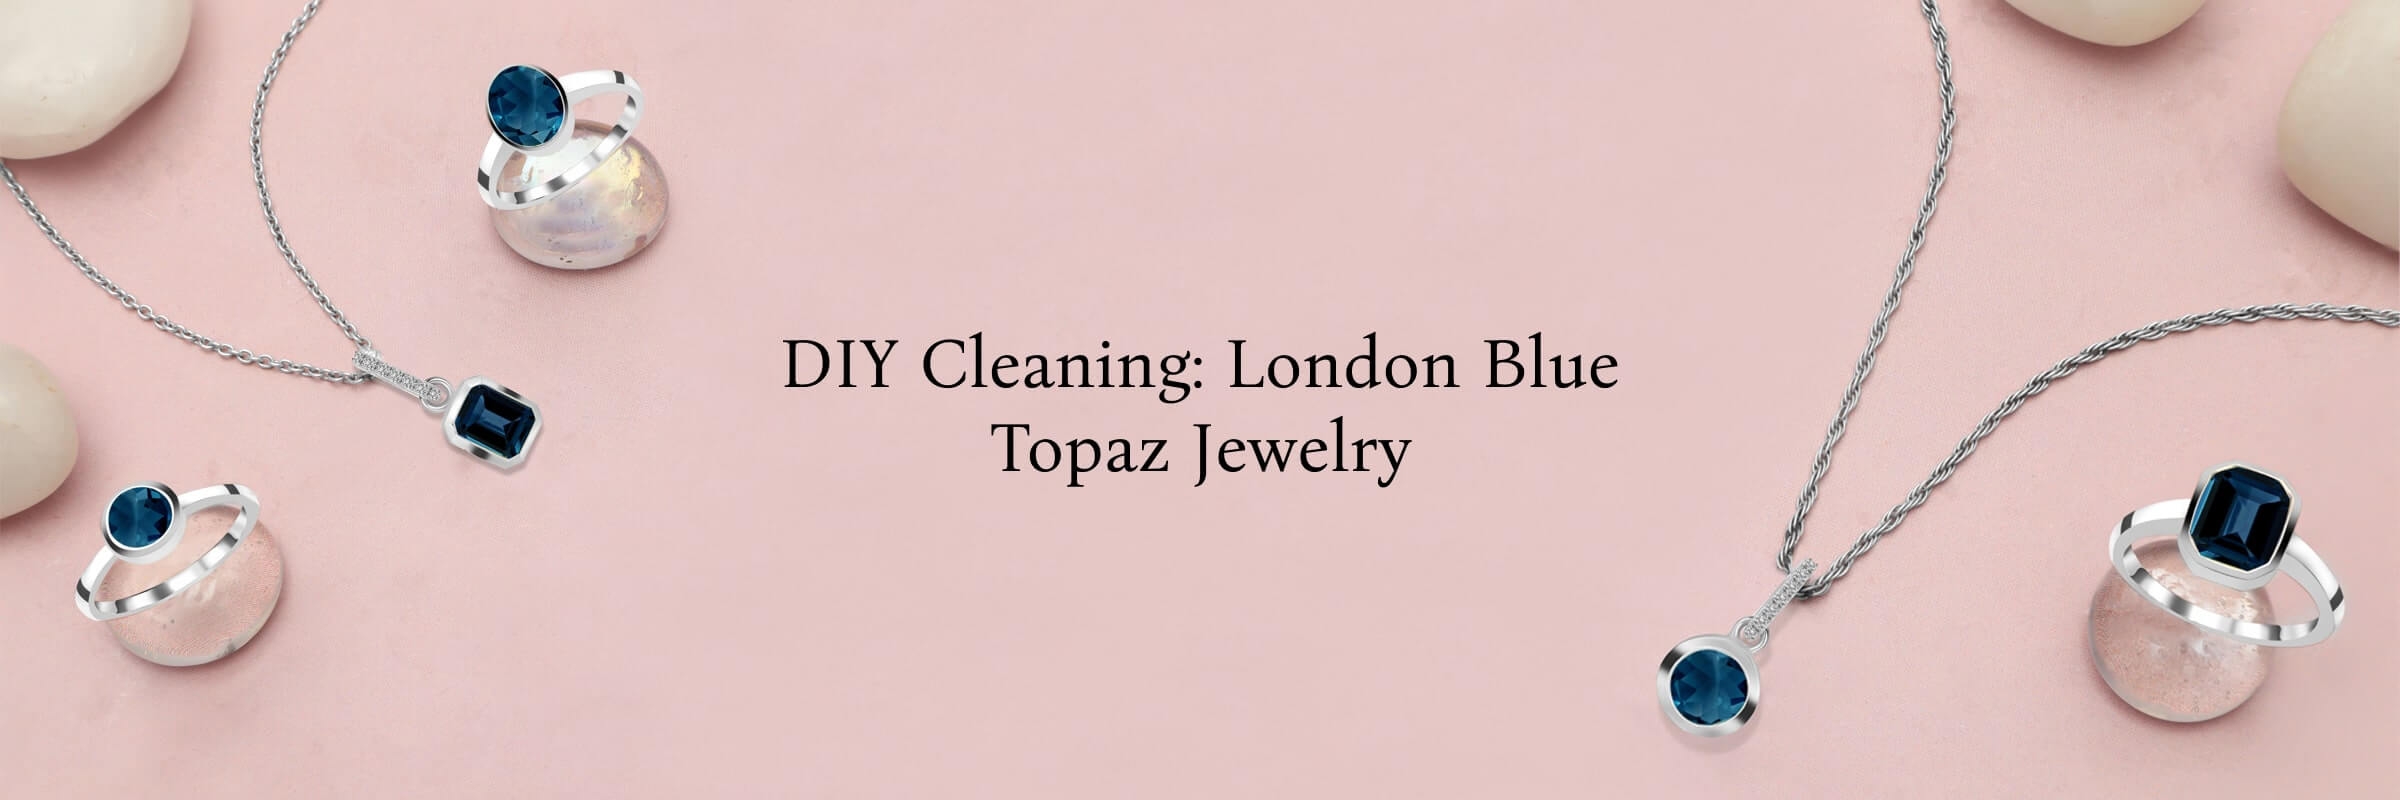 DIY Cleaning Instructions for London Blue Topaz Jewellery